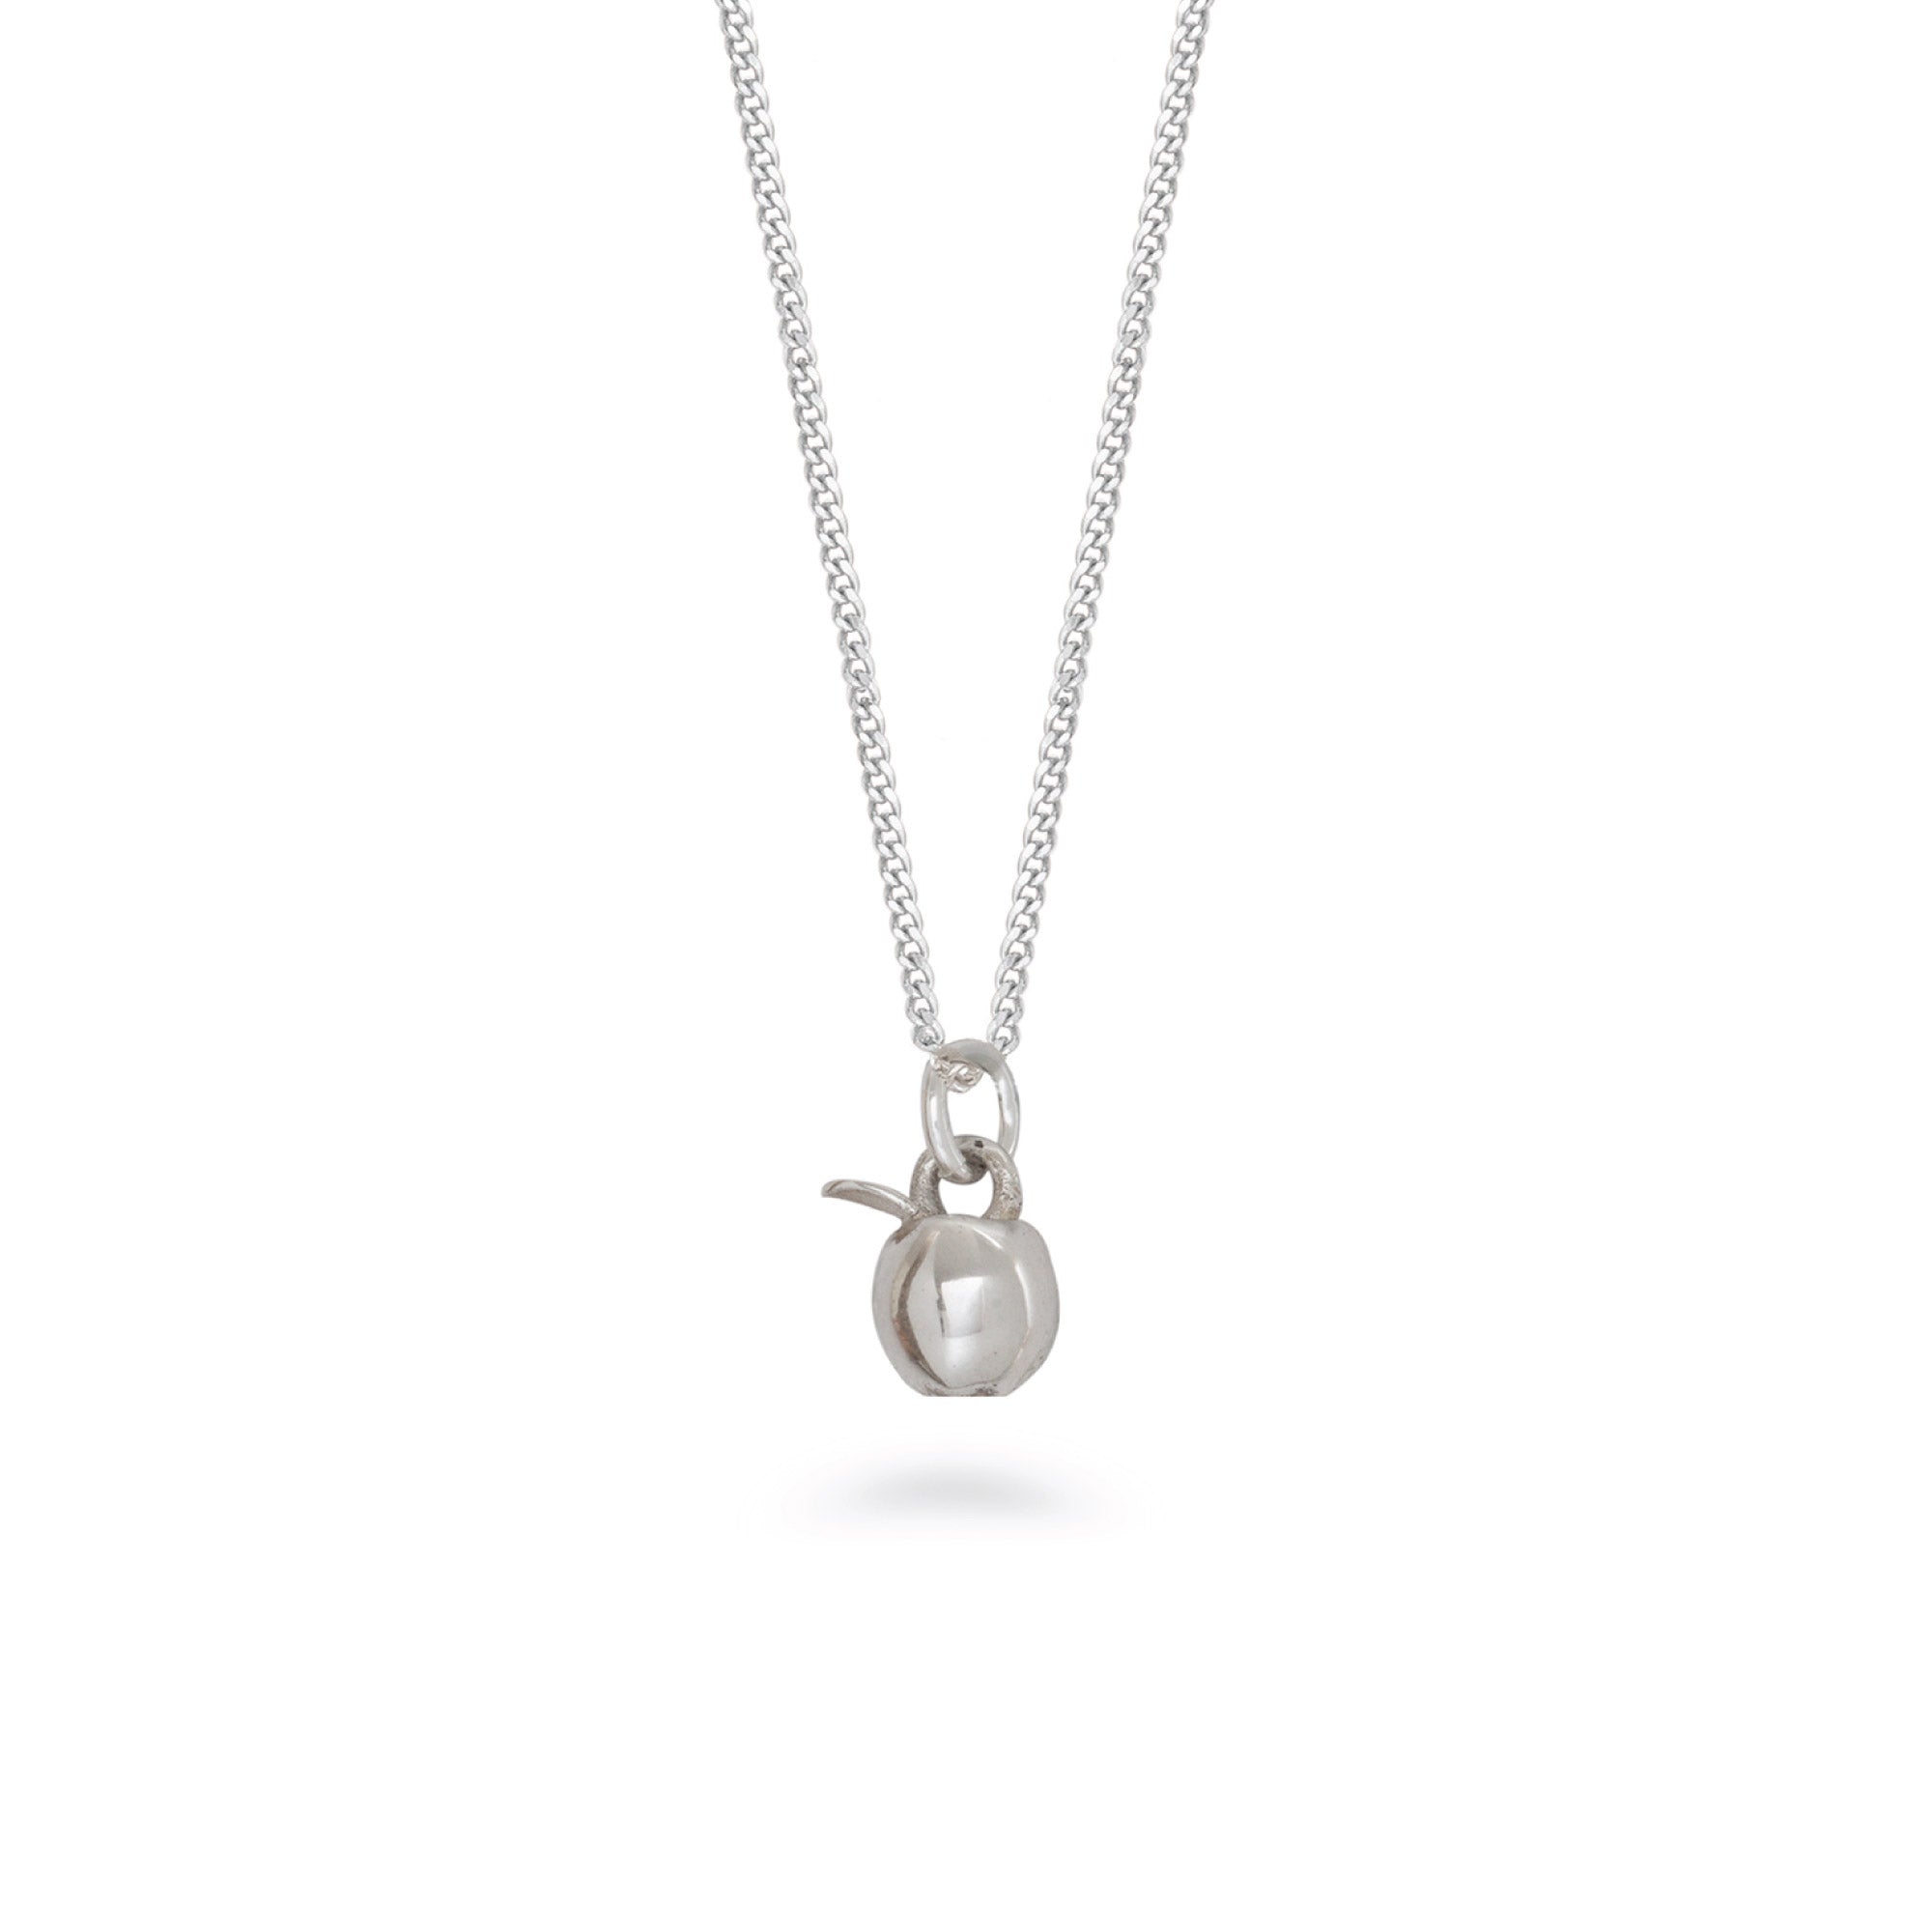 Tiny Apple Charm Necklace Sterling Silver